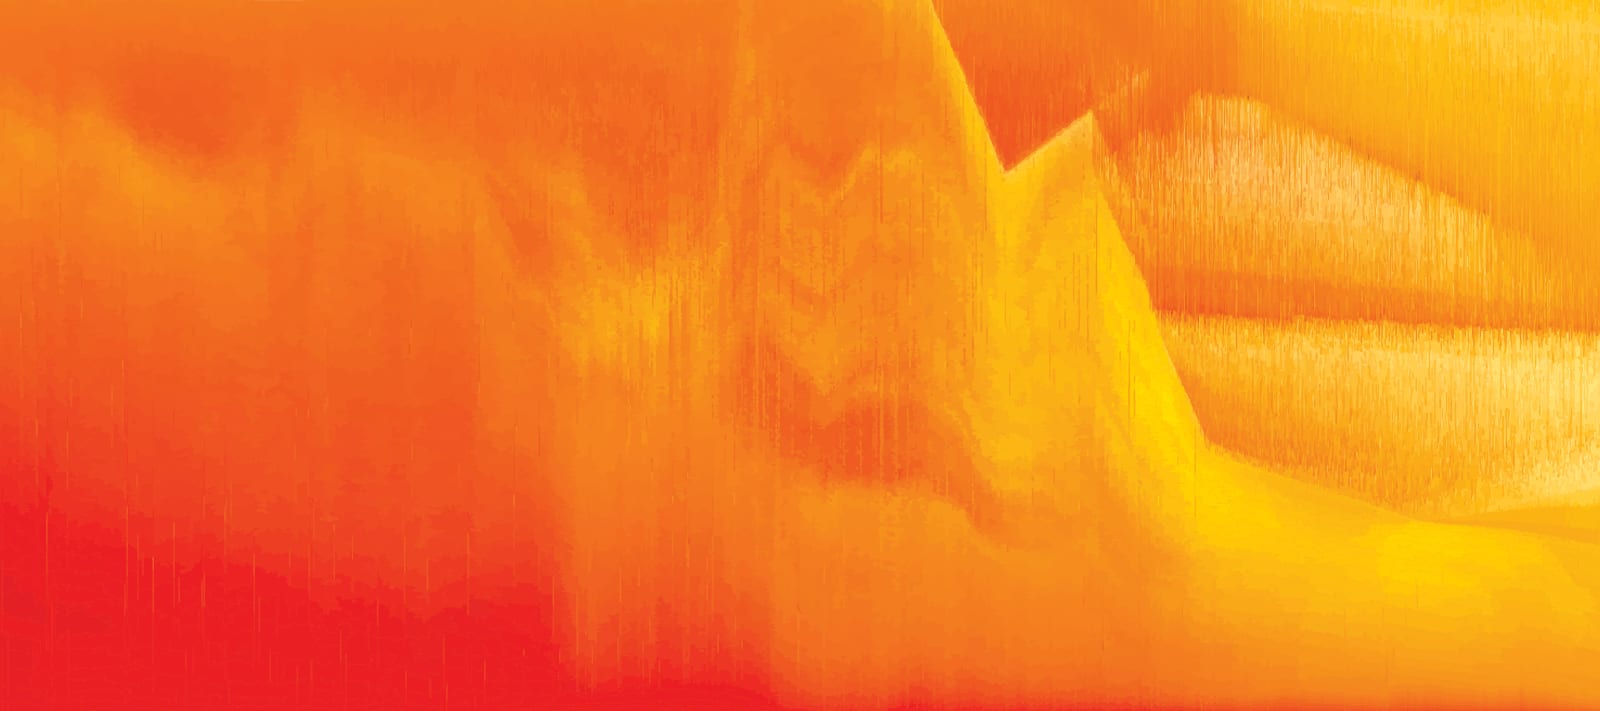 Abstract background image - ThermalComp